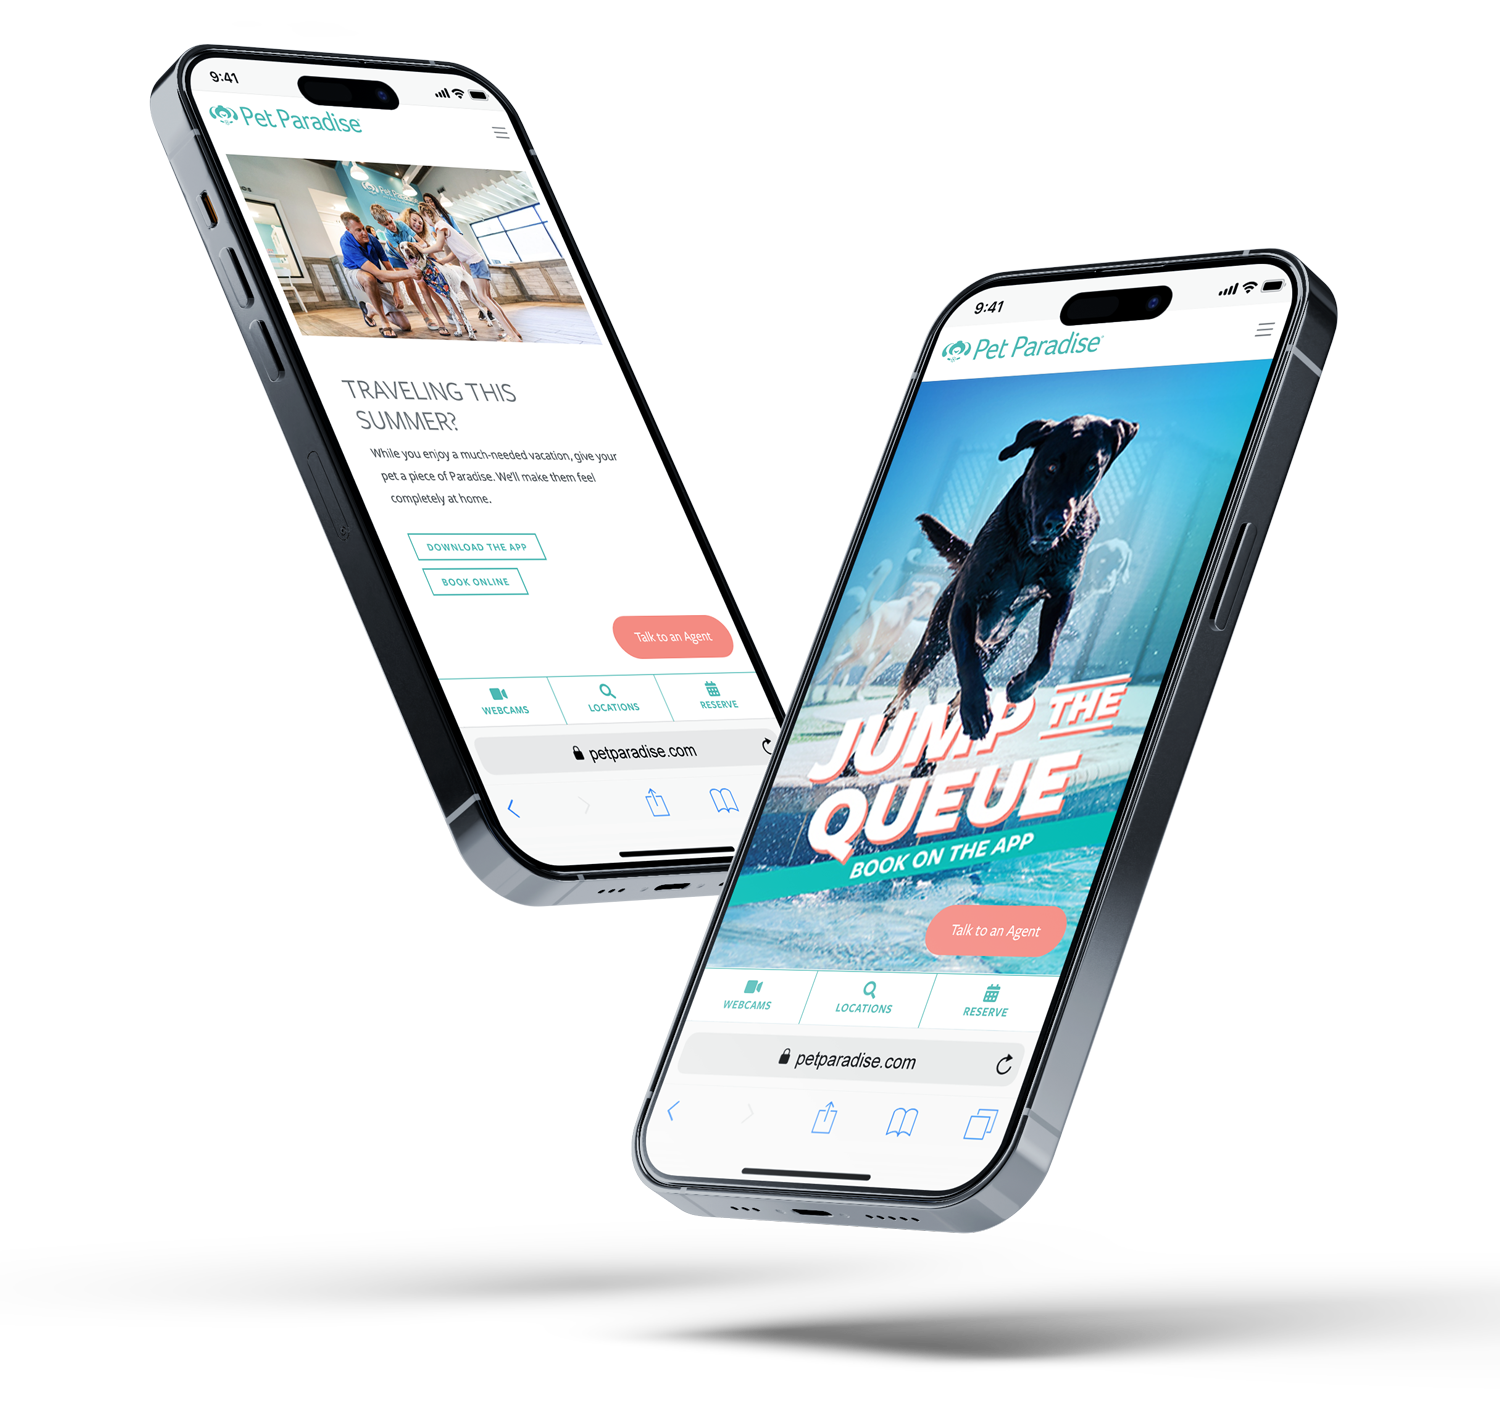 A Pet Paradise webpage promoting their Jump the Queue marketing campaign is shown on two phones.